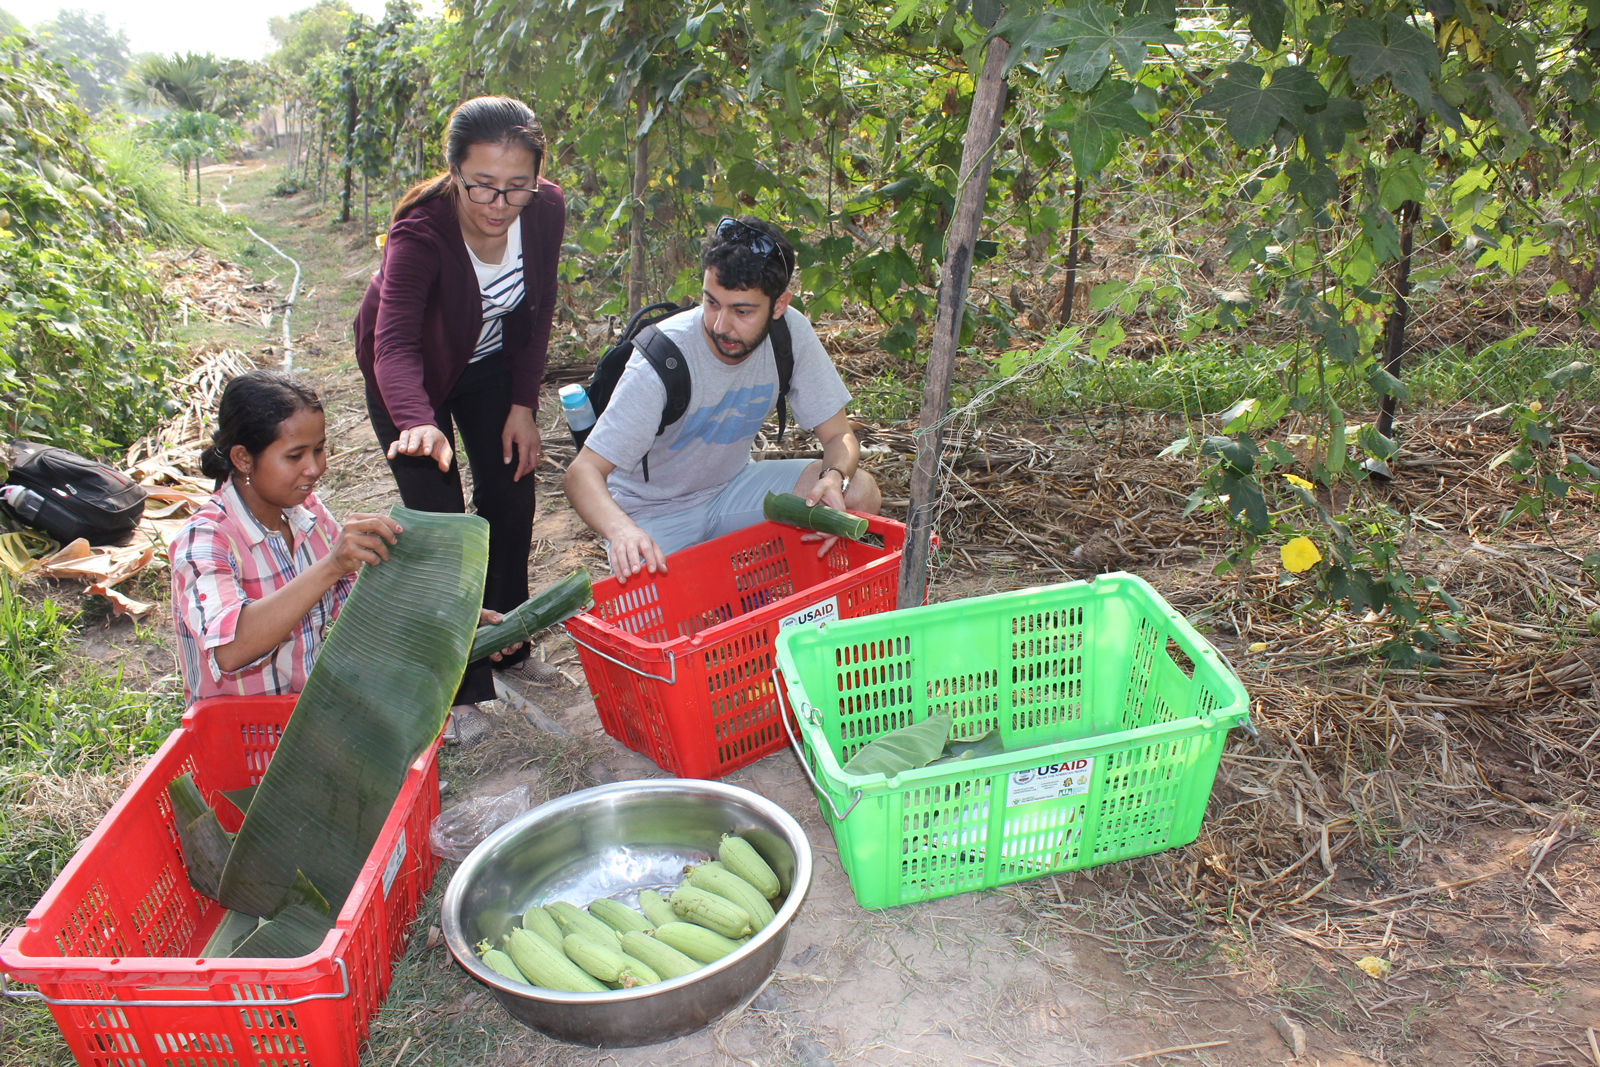 From left, farmer Eang Chakriya and technician Sel Rechaney show UC Davis researcher Angelos Deltsidis how they harvest sponge gourd and wrap the vegetable in banana leaves to pack and transport.